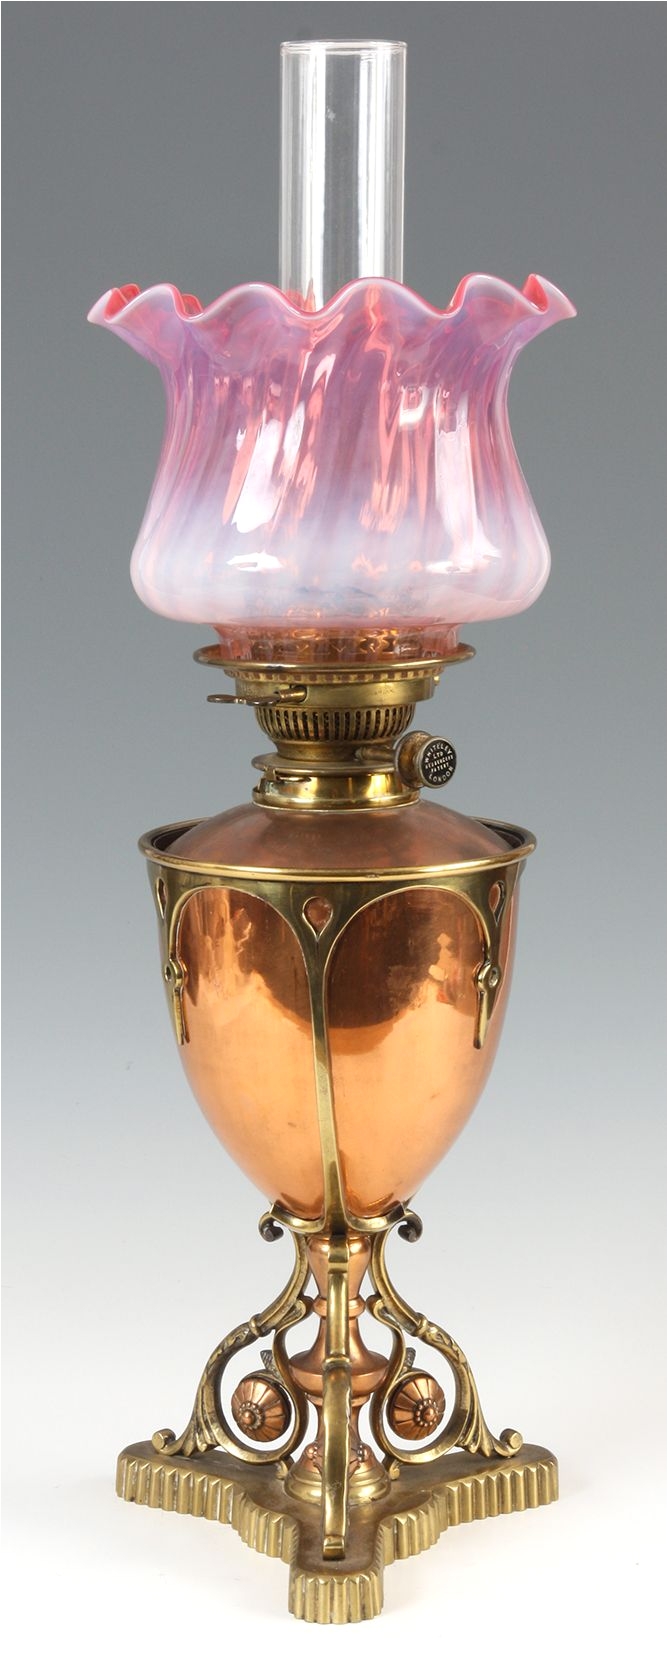 buy online view images and see past prices for a late victorian gothic style copper